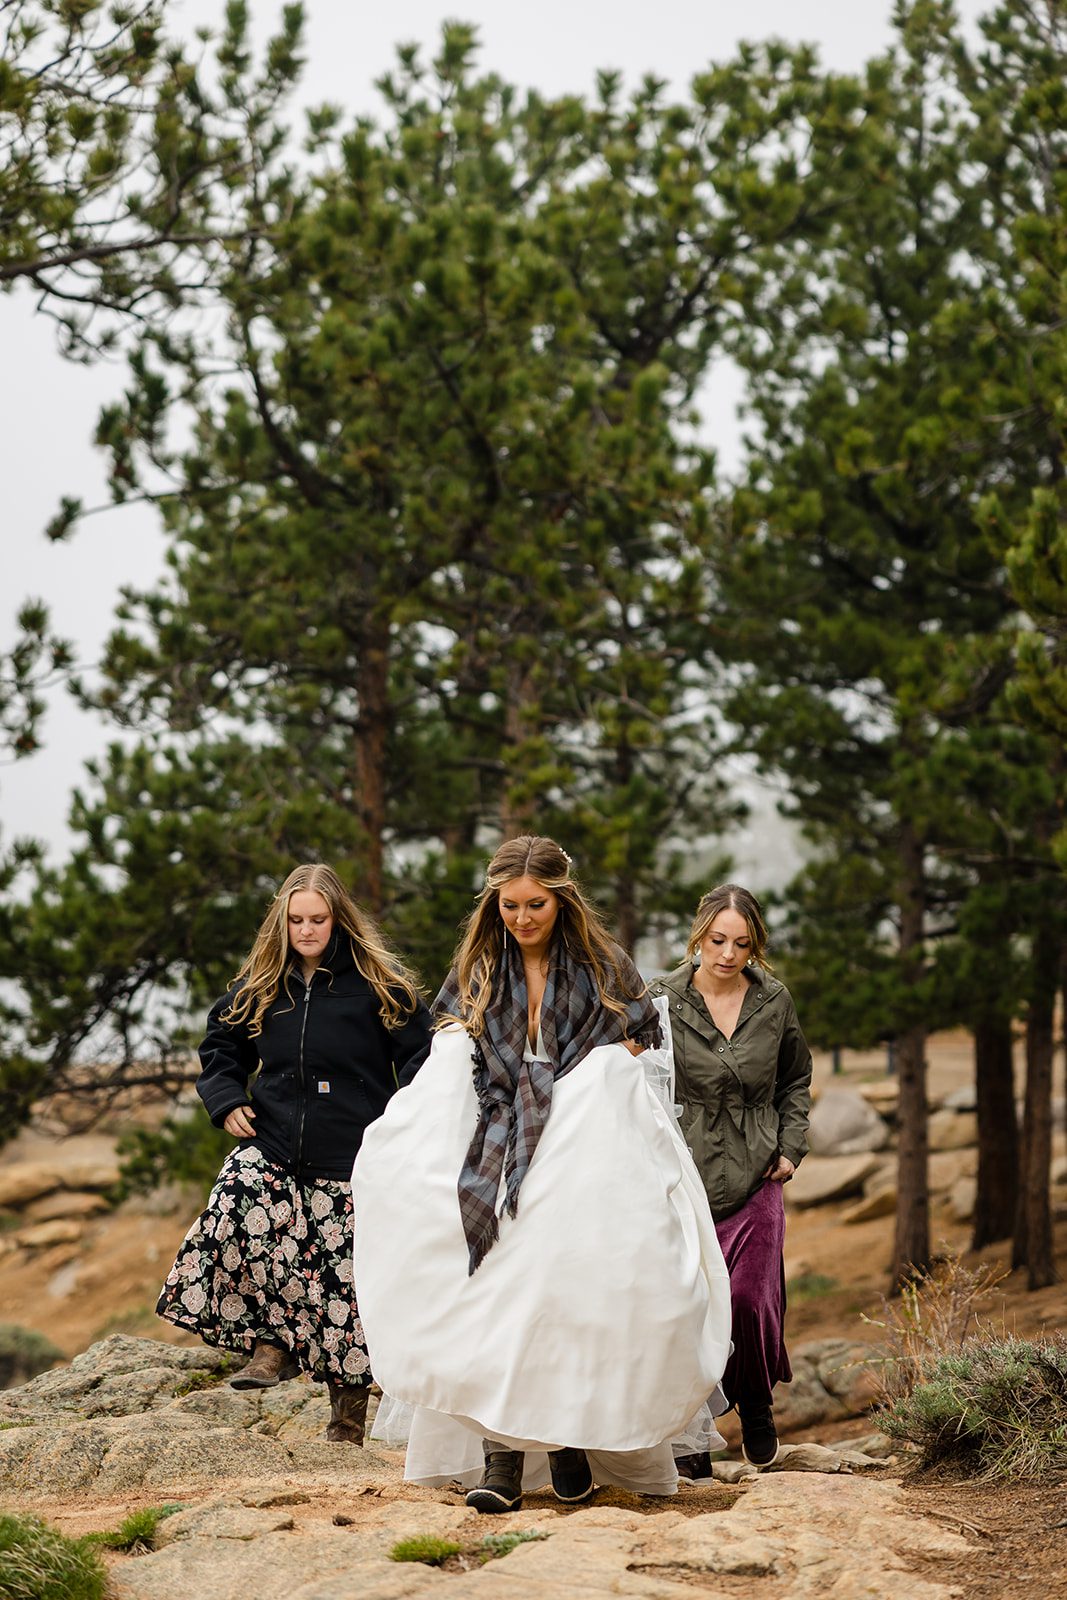 Wedding first look at 3M Curve in Rocky Mountain National Park Estes Park Colorado Elopement